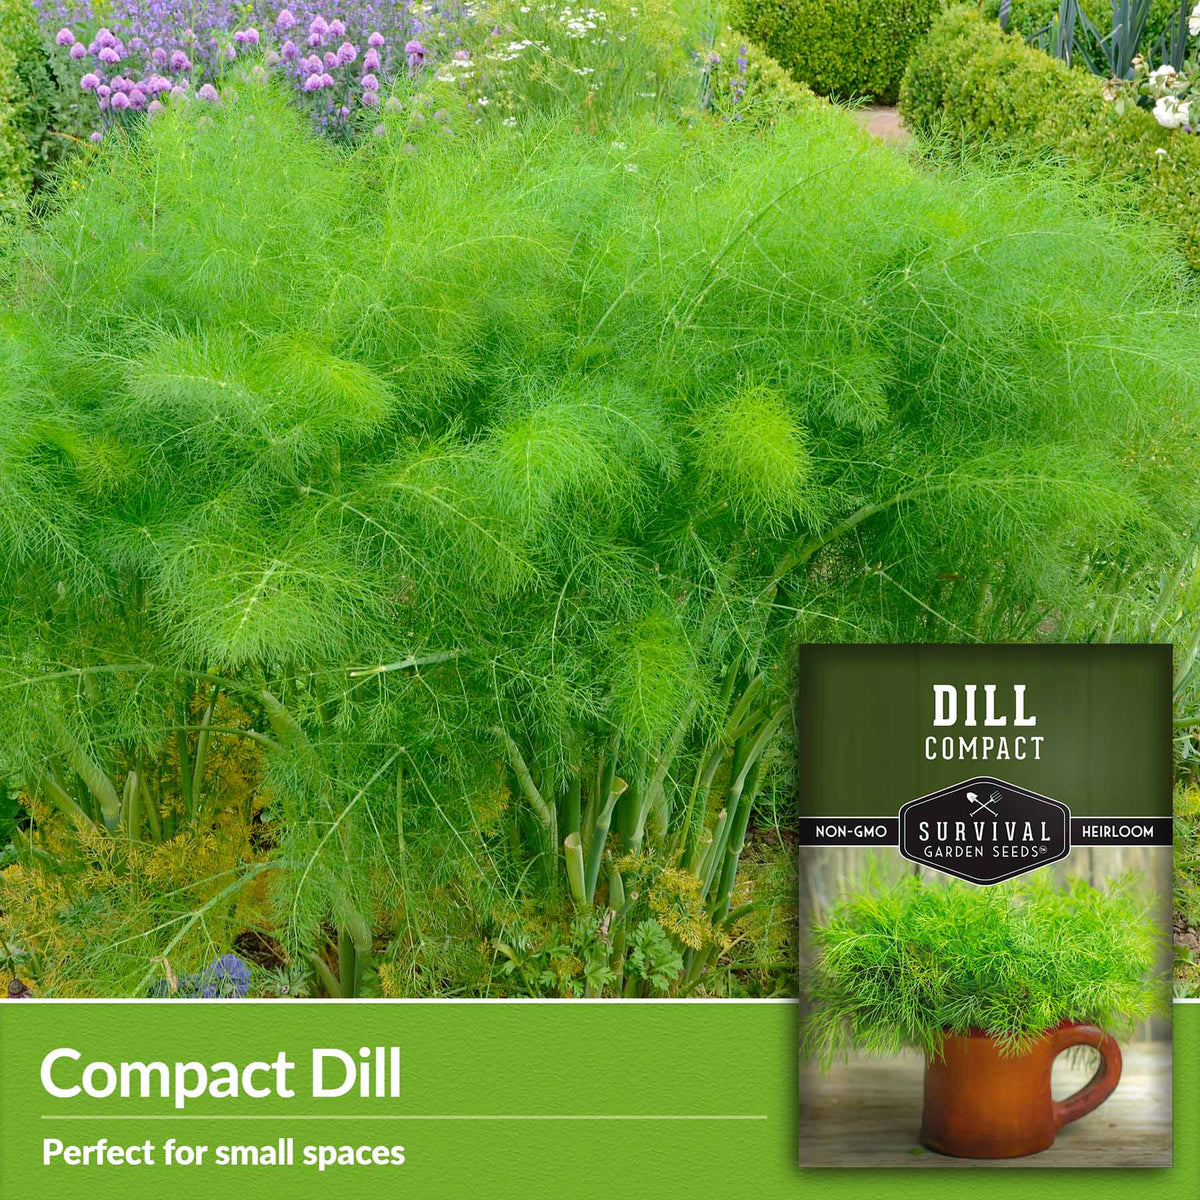 Compact Dill perfect for small spaces